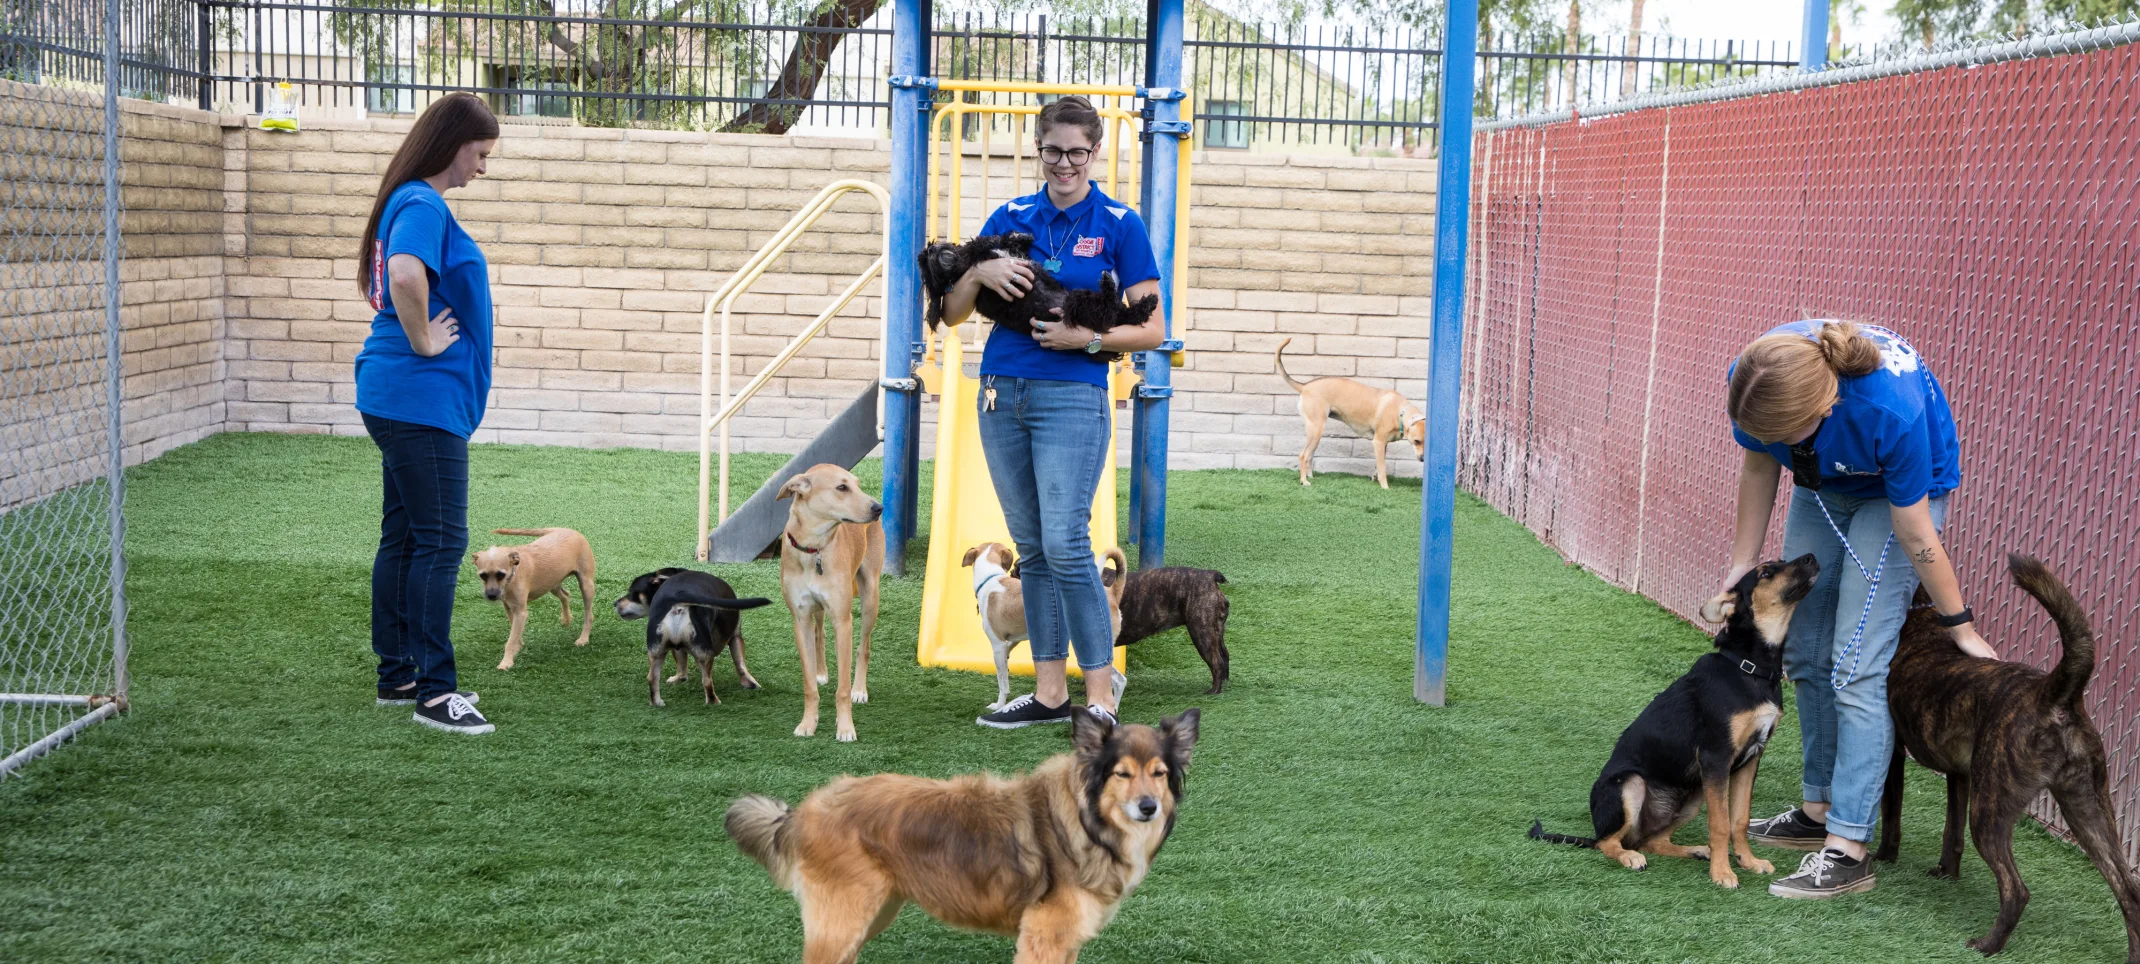 dogs in play yard with staff